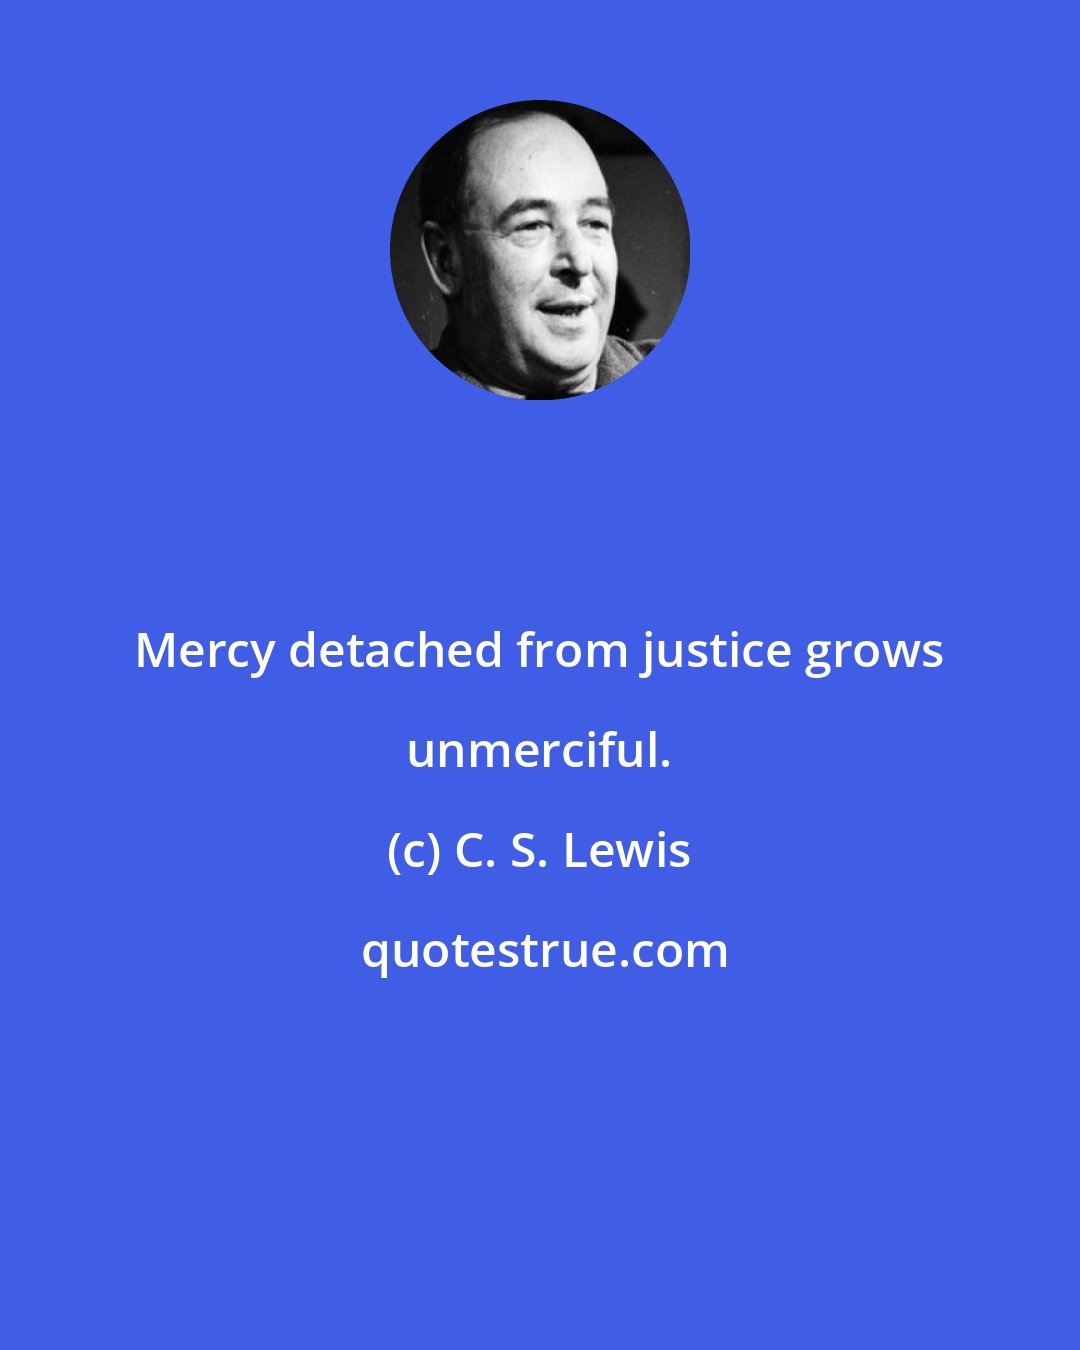 C. S. Lewis: Mercy detached from justice grows unmerciful.